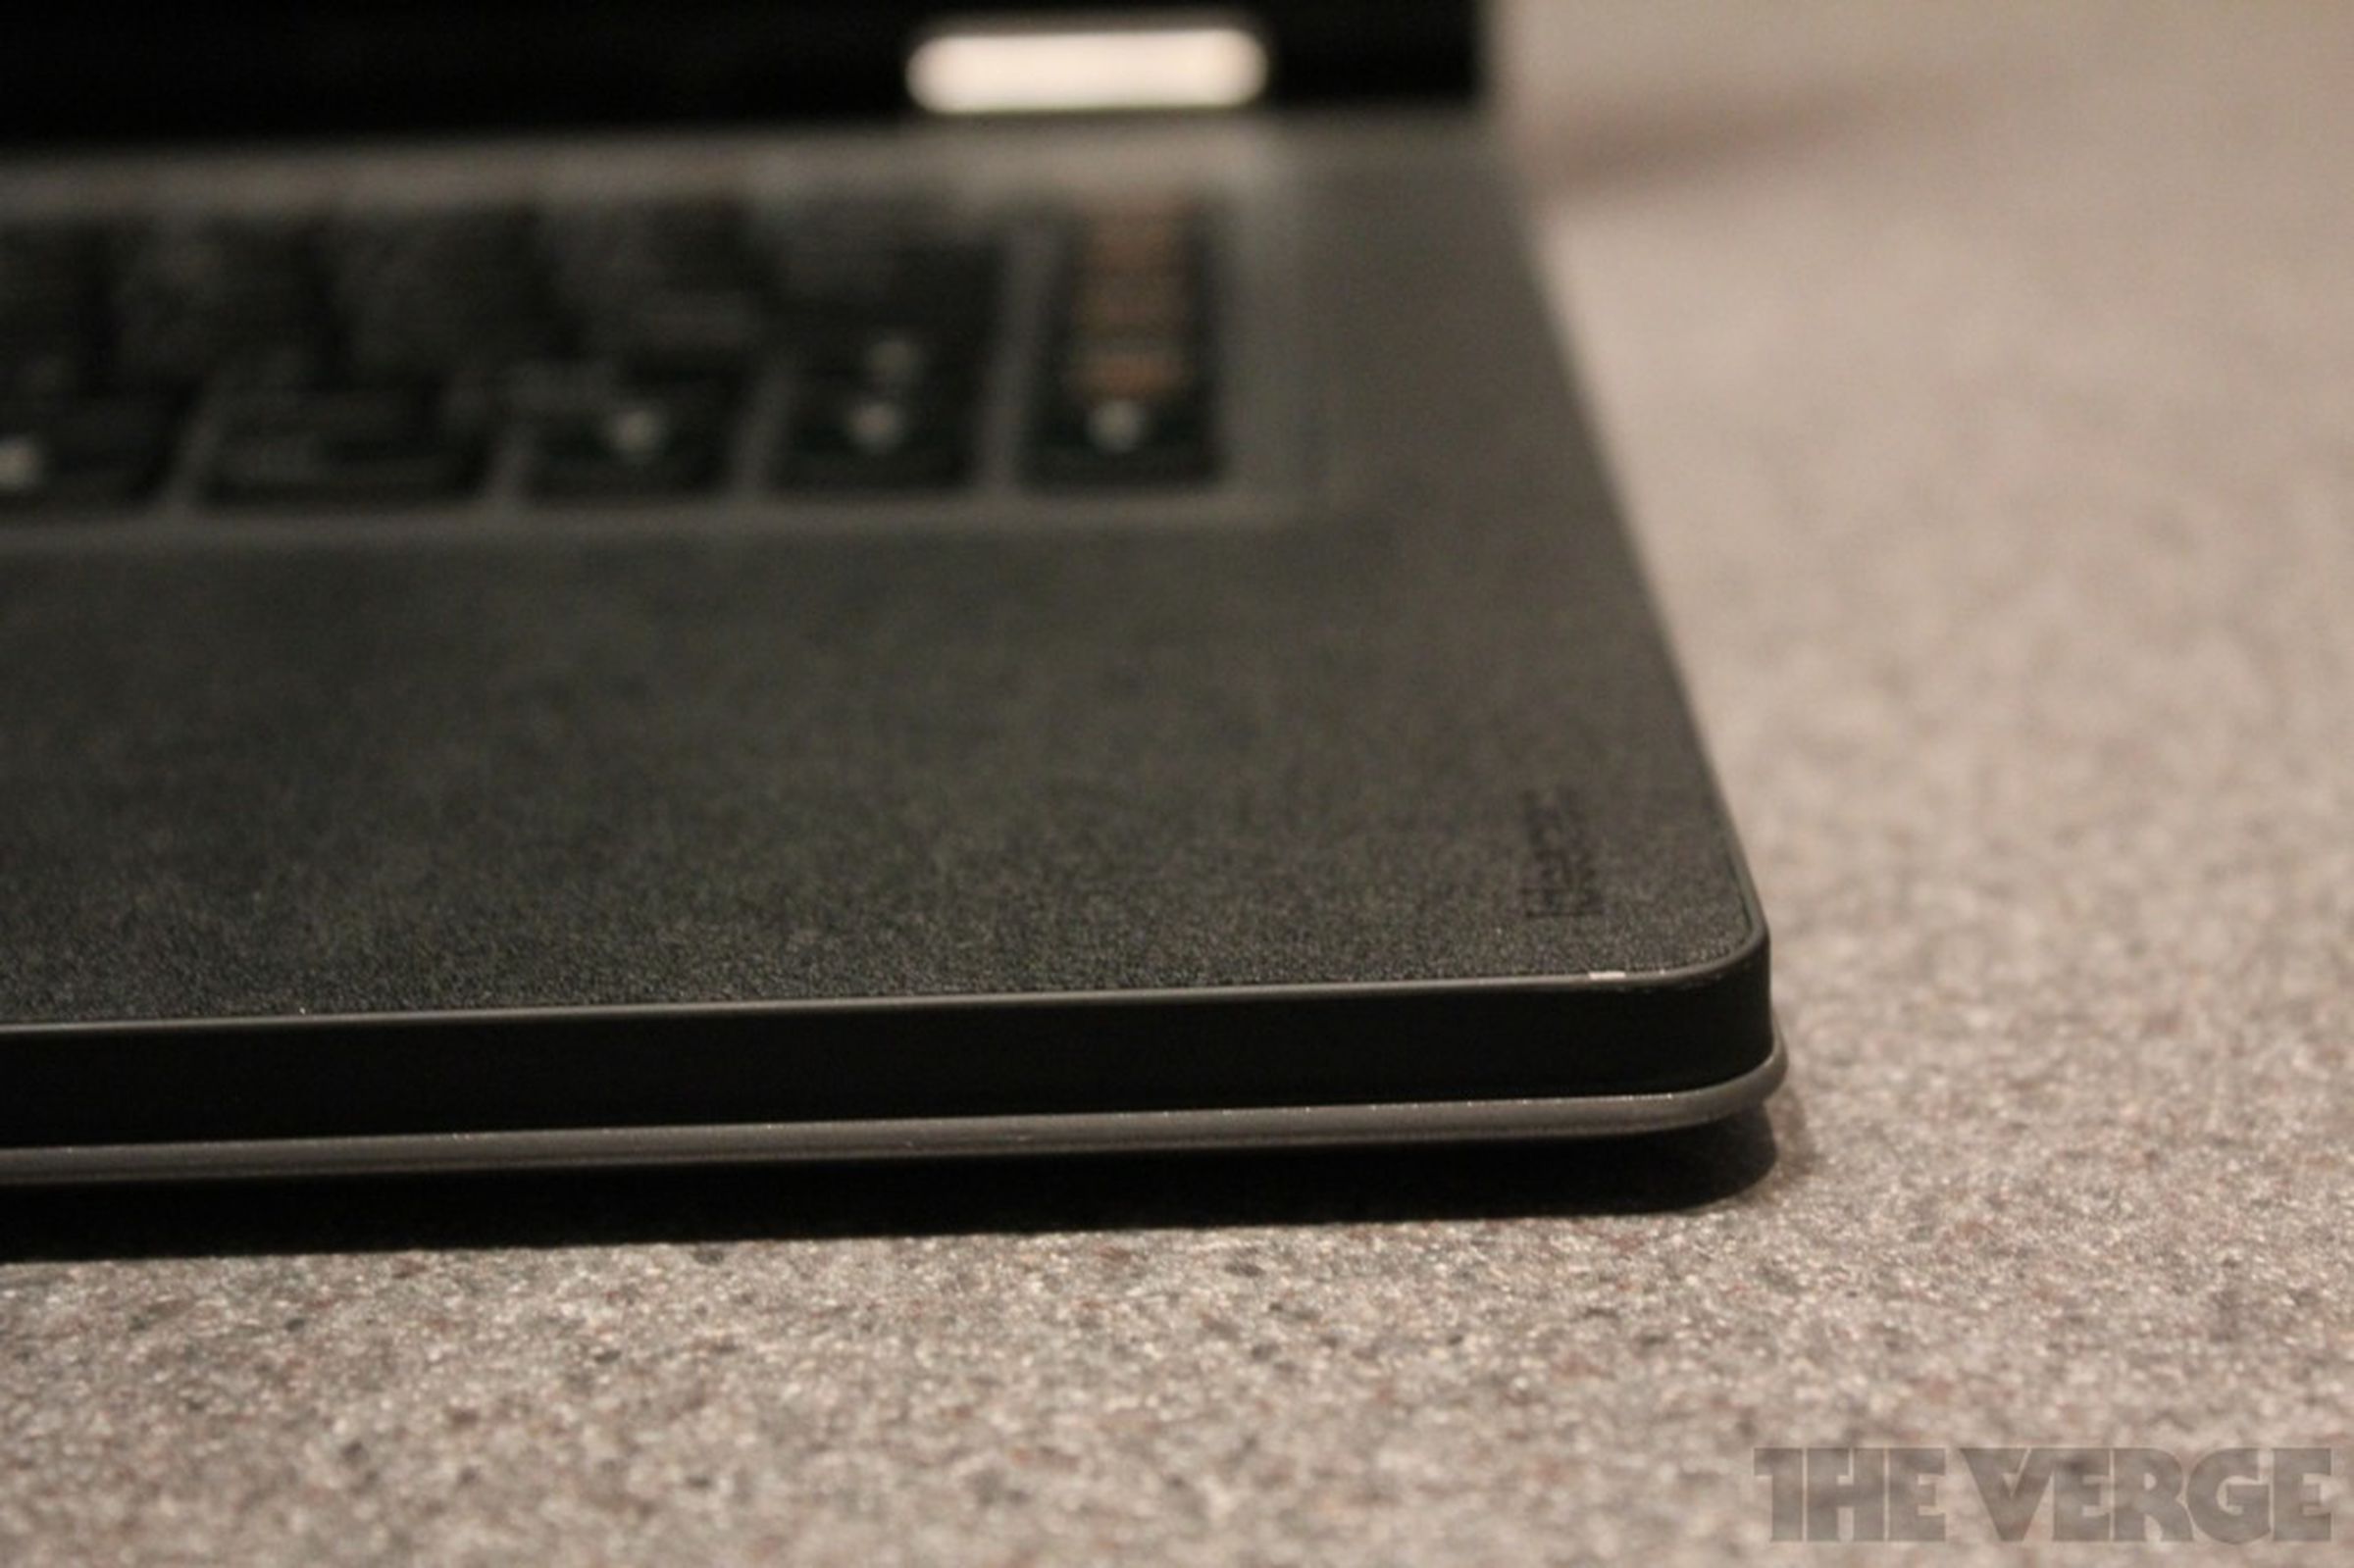 Lenovo IdeaPad Yoga hands-on pictures